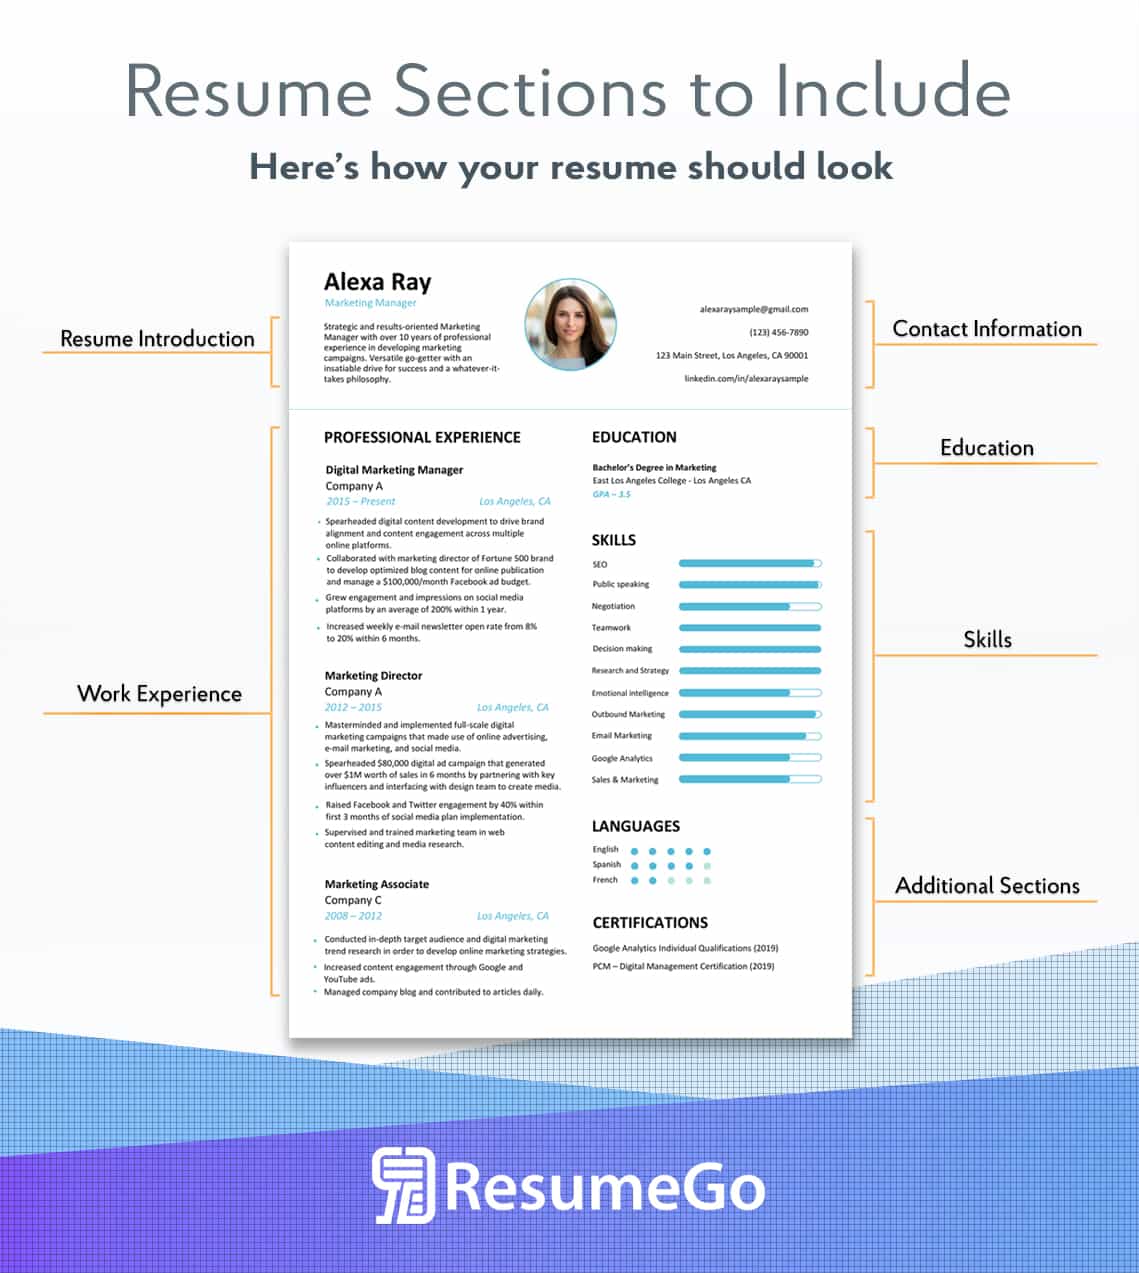 how to write about me section of resume